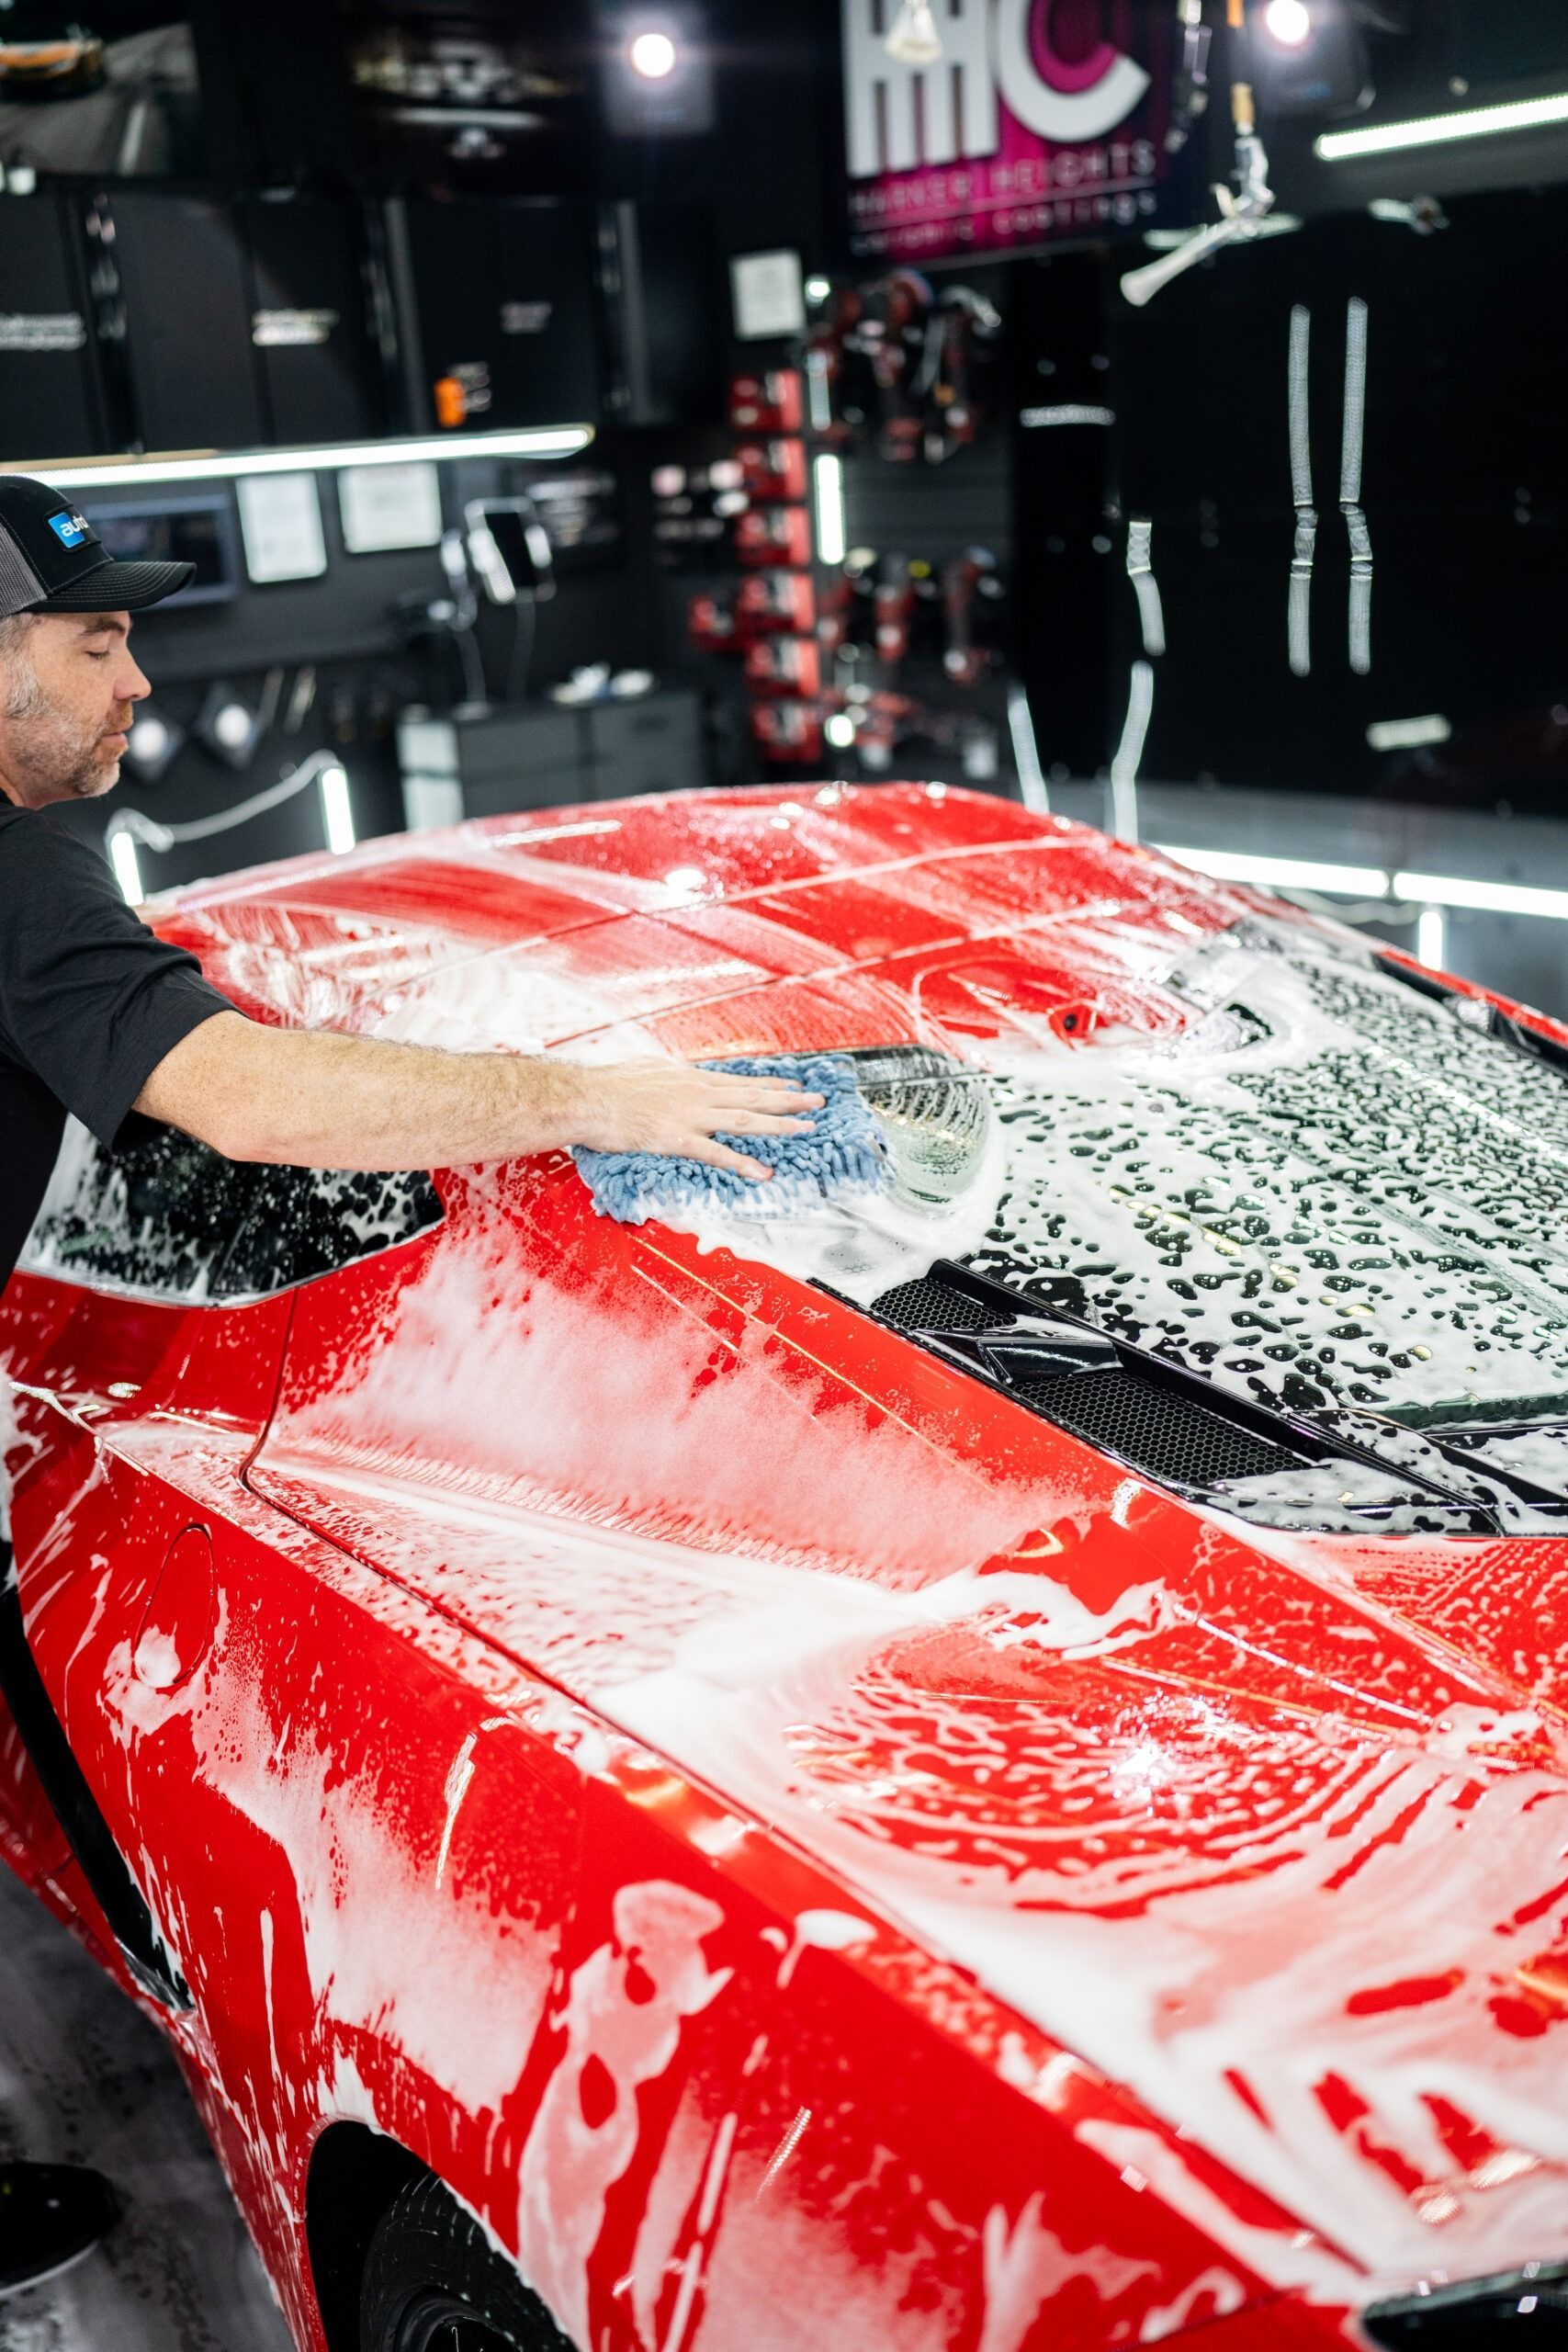 A man is washing a red car with soap and water.